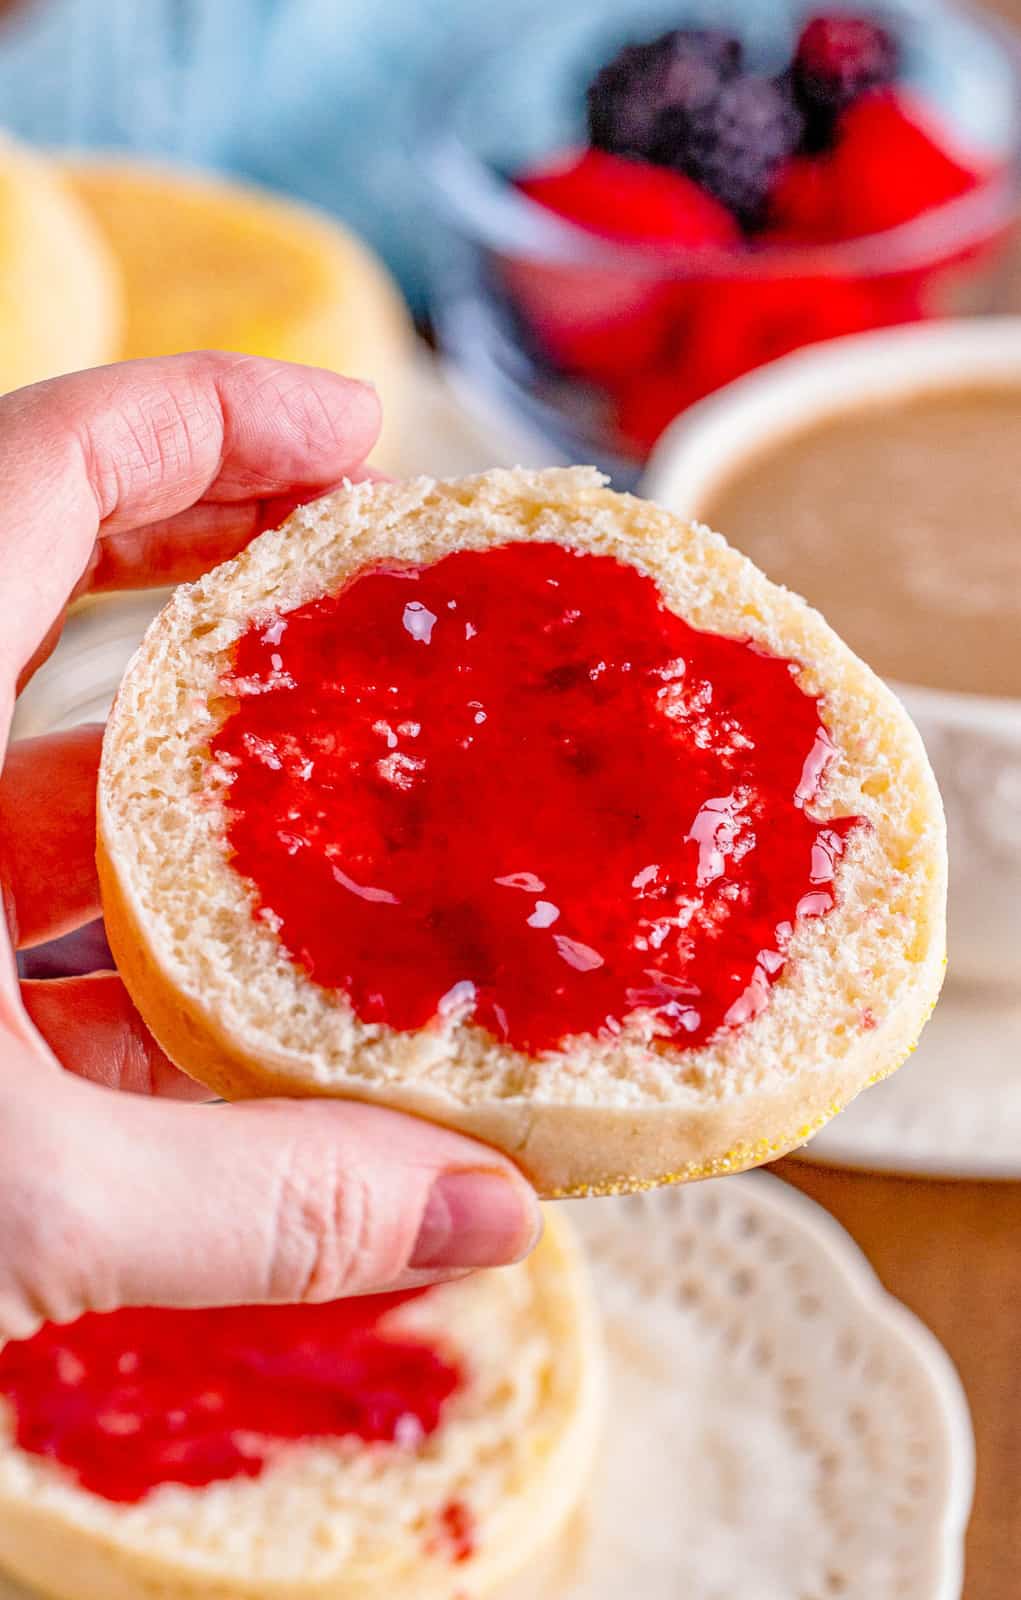 Hand holding up one side of English Muffin showing jelly.